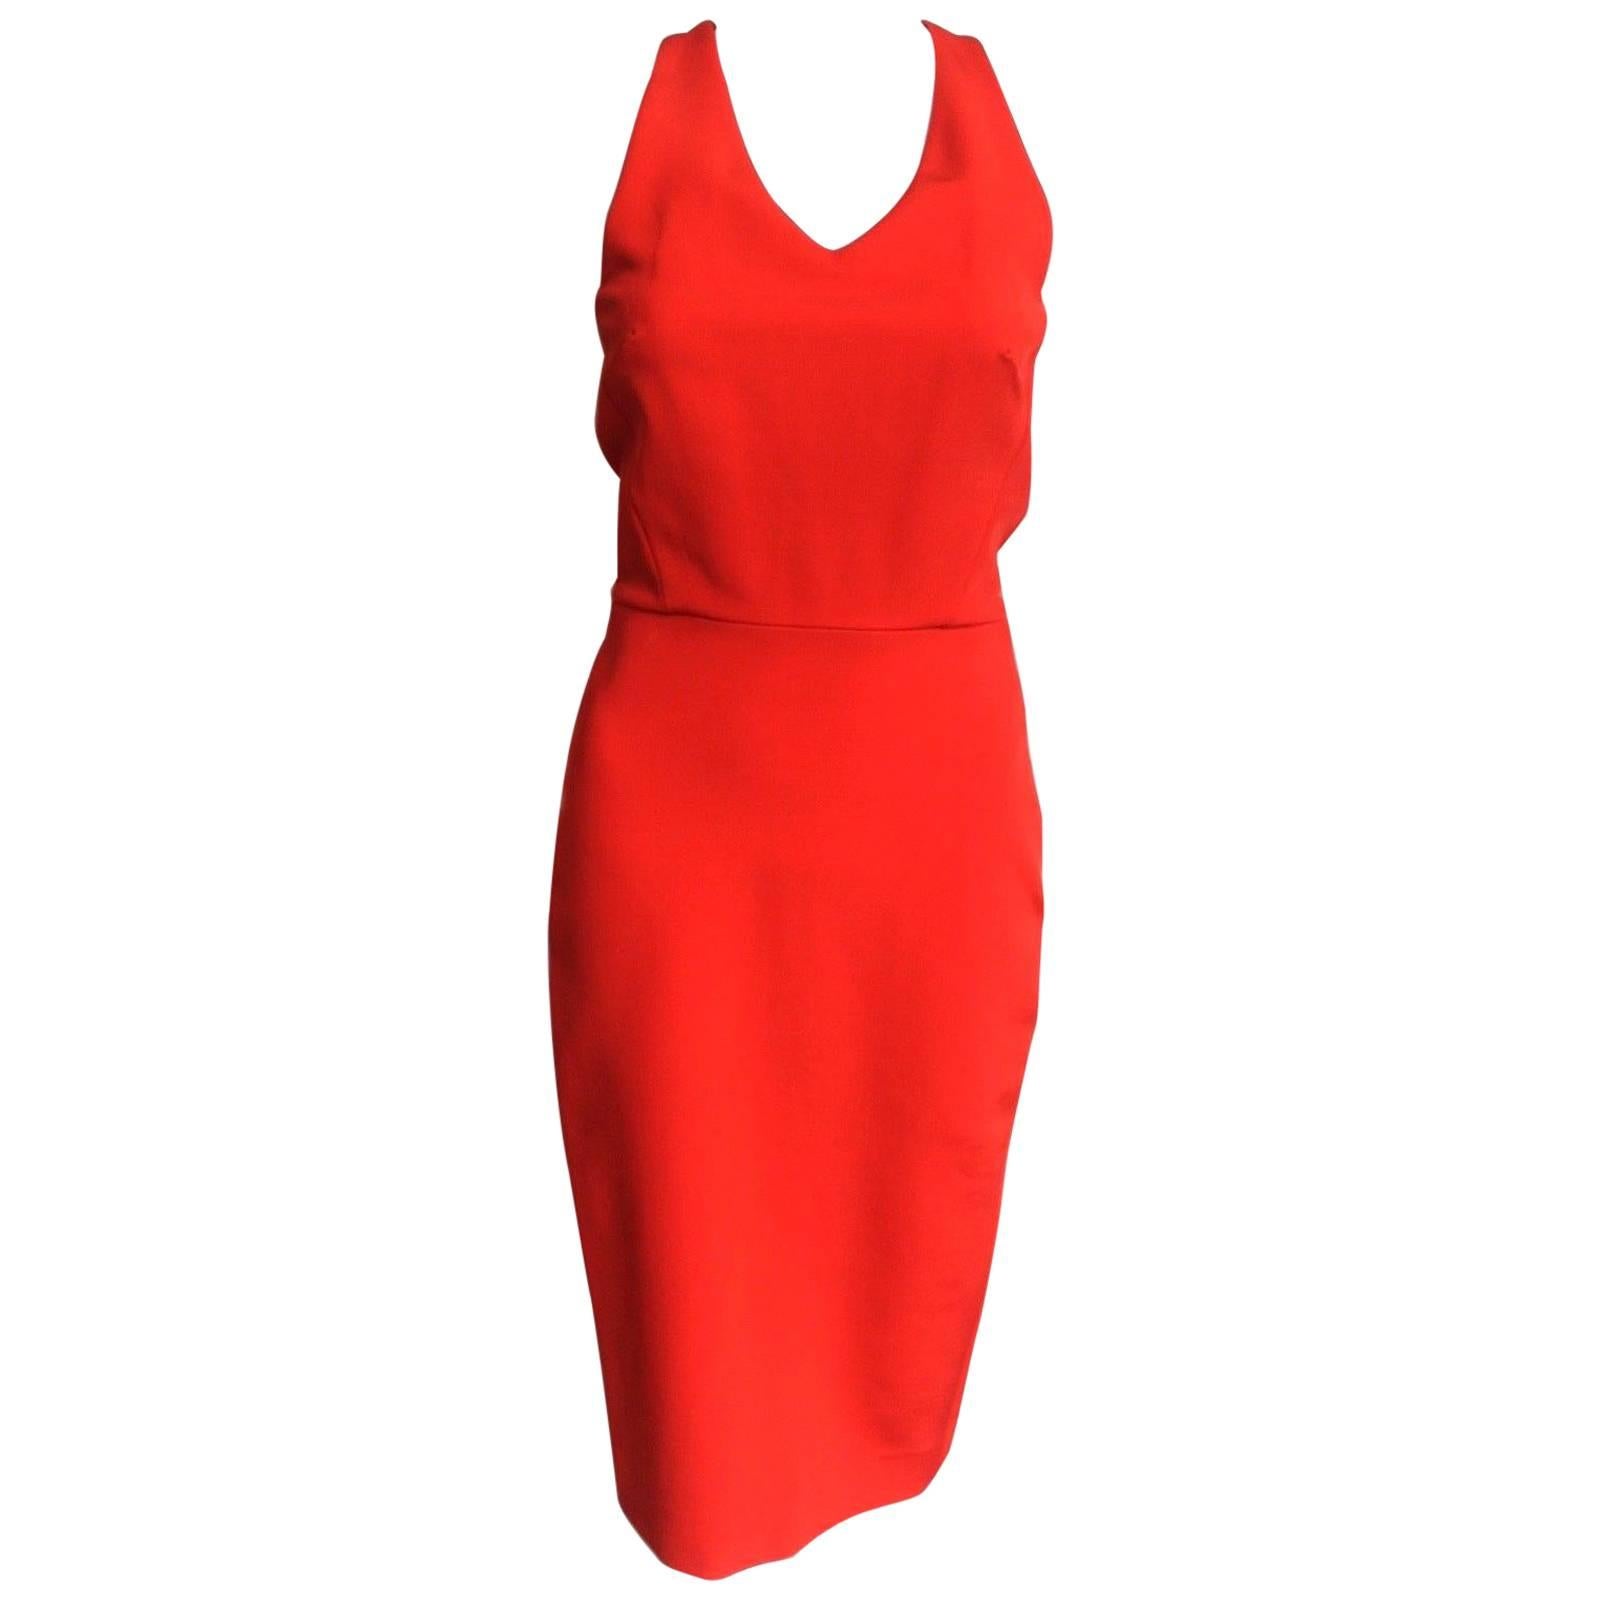 Victoria Beckham Fitted Jersey Racerback Dress Candy Red UK 10 